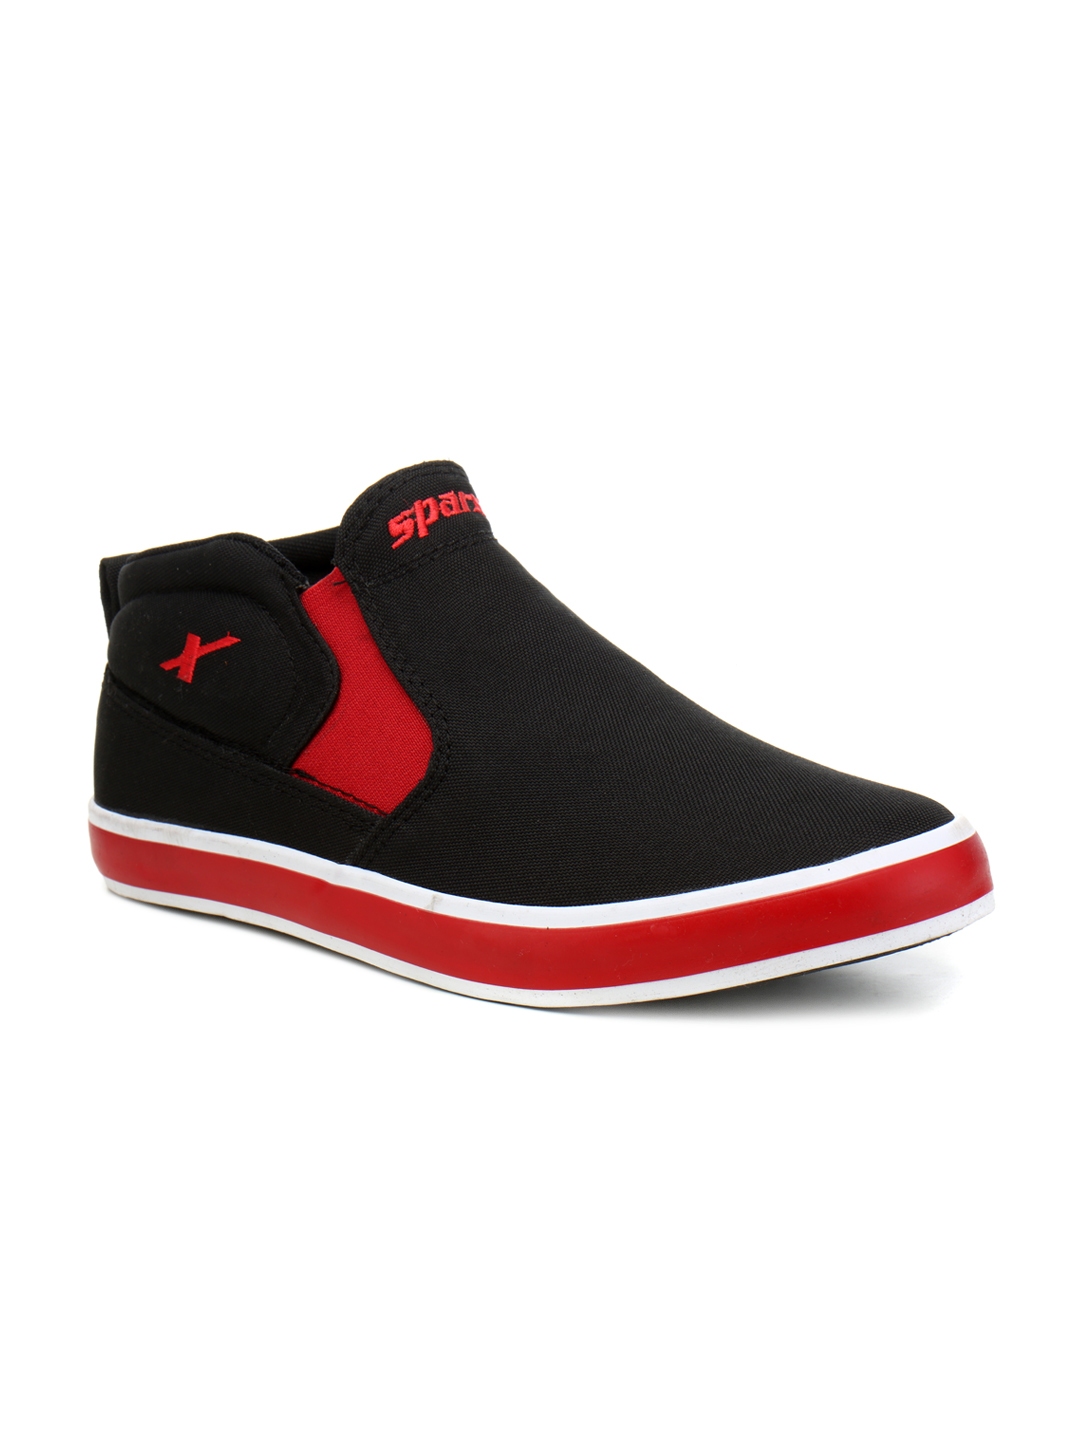 sparx shoes in red colour